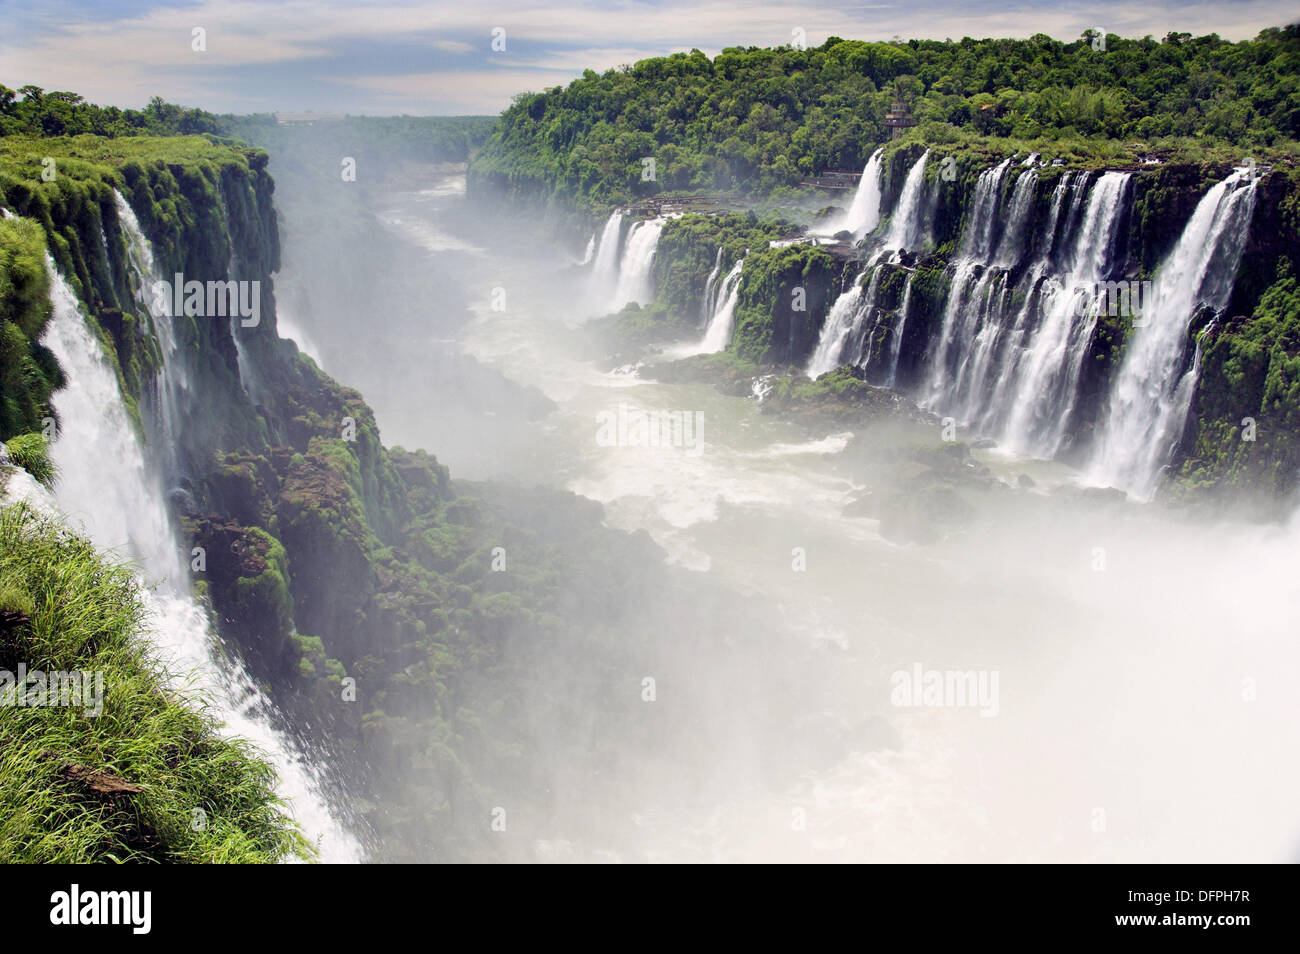 Iguassu Falls as viewed from the Argentinean side of the Igaussu river gorge. Stock Photo